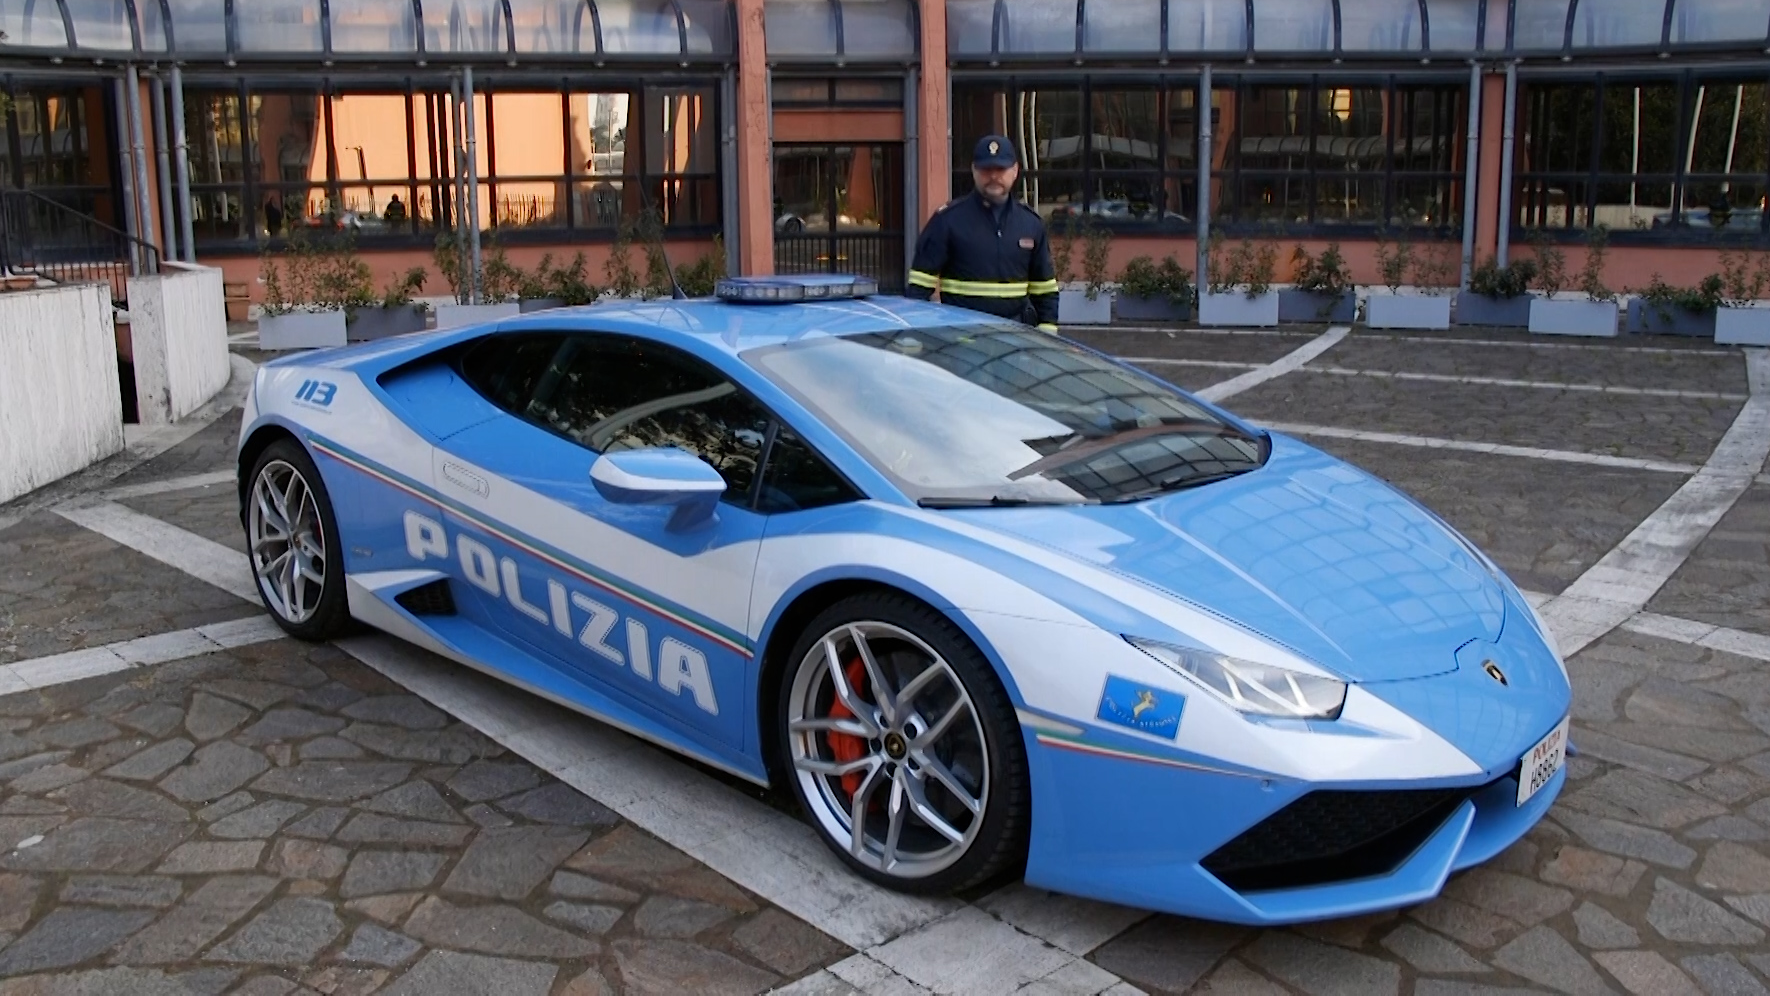 A Lamborghini Huracán police car that's used by Italian police to transport life-saving organs to patients across the country./CGTN Europe/